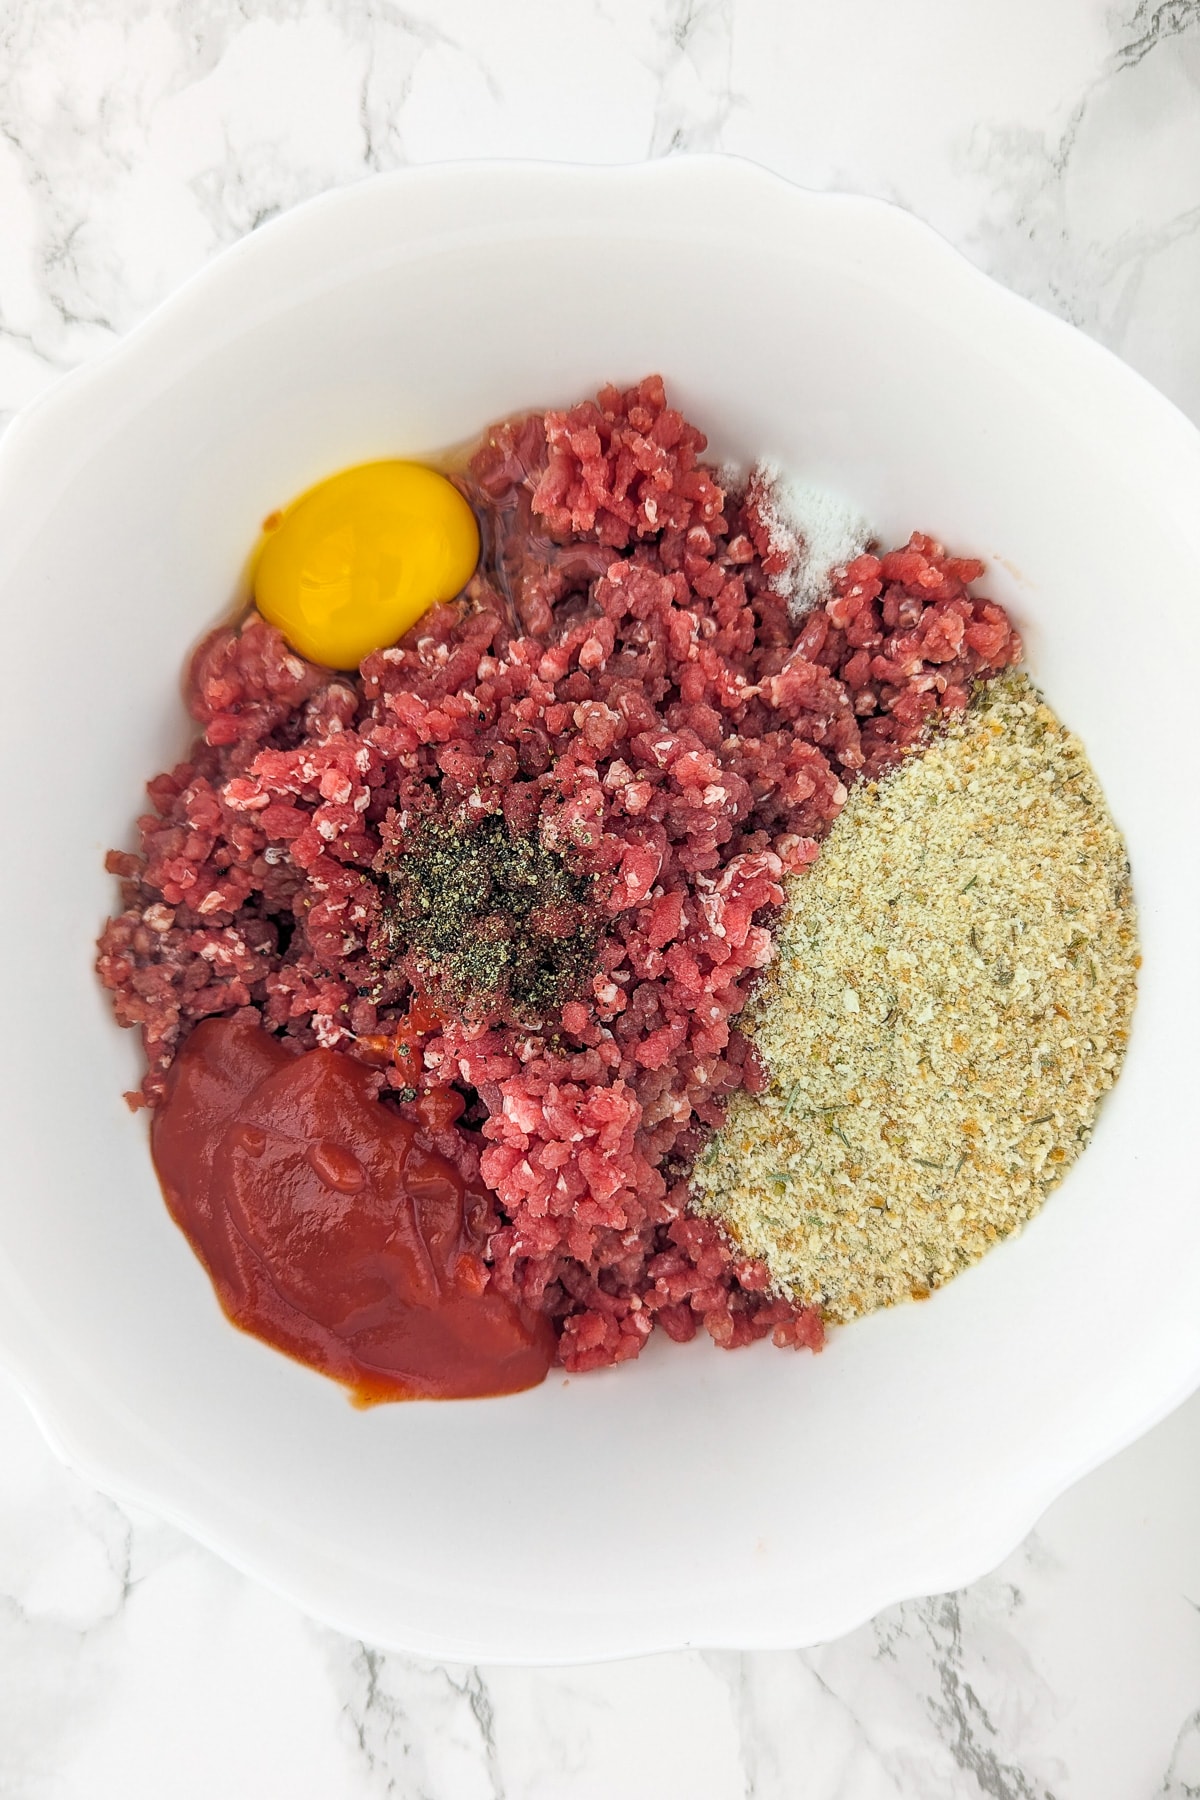 Top view of a white bowl with ground beef, egg, ketchup, breadcrumbs, and spices.